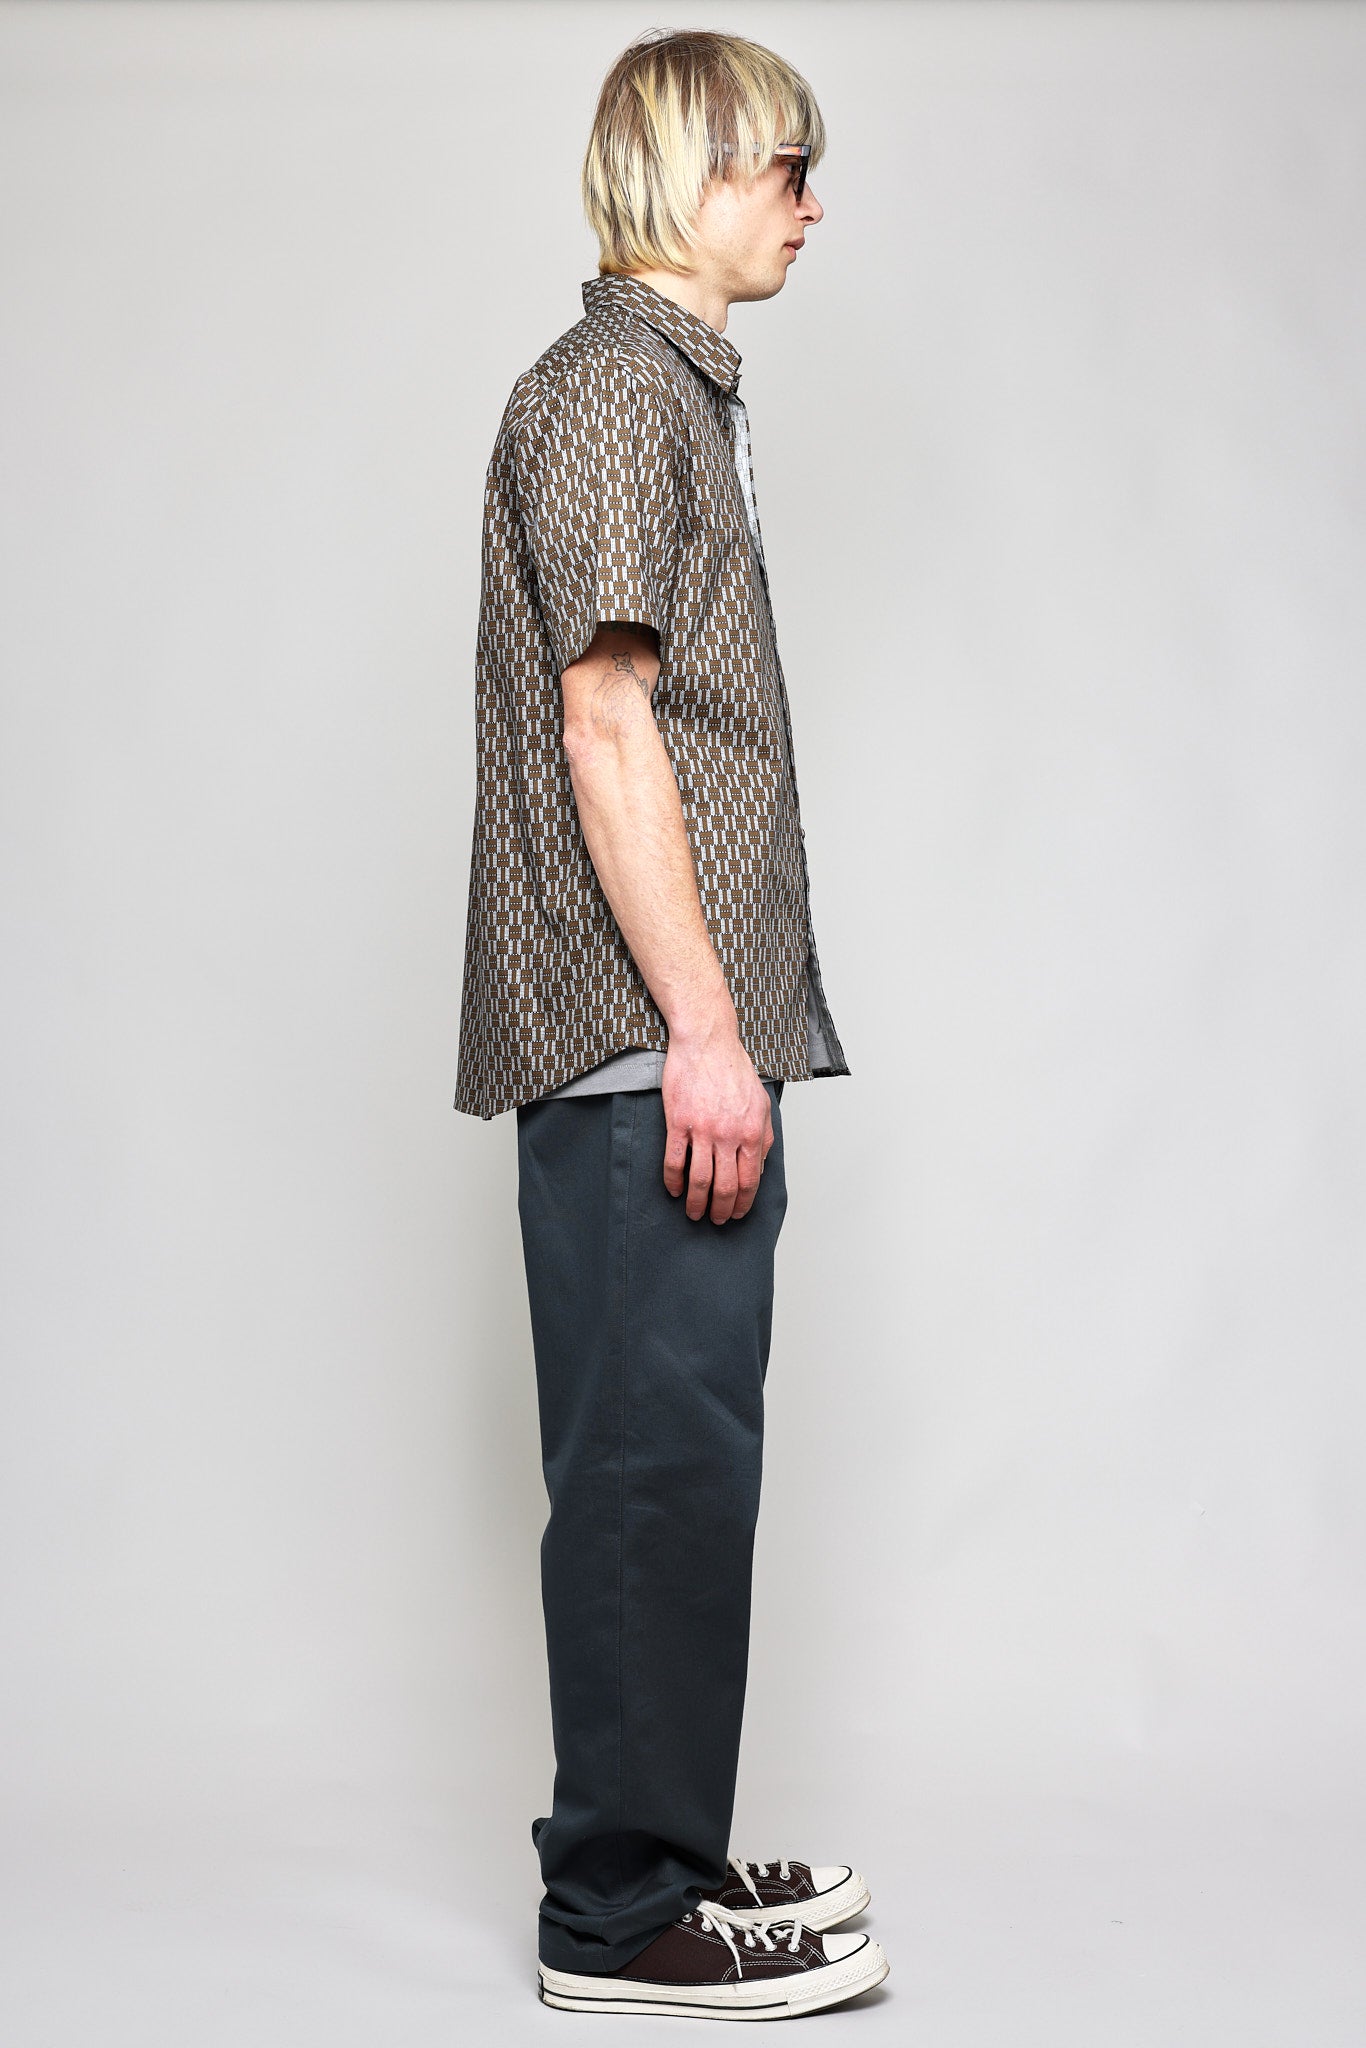 Japanese Graphic Grid Print in Khaki and Blue 04